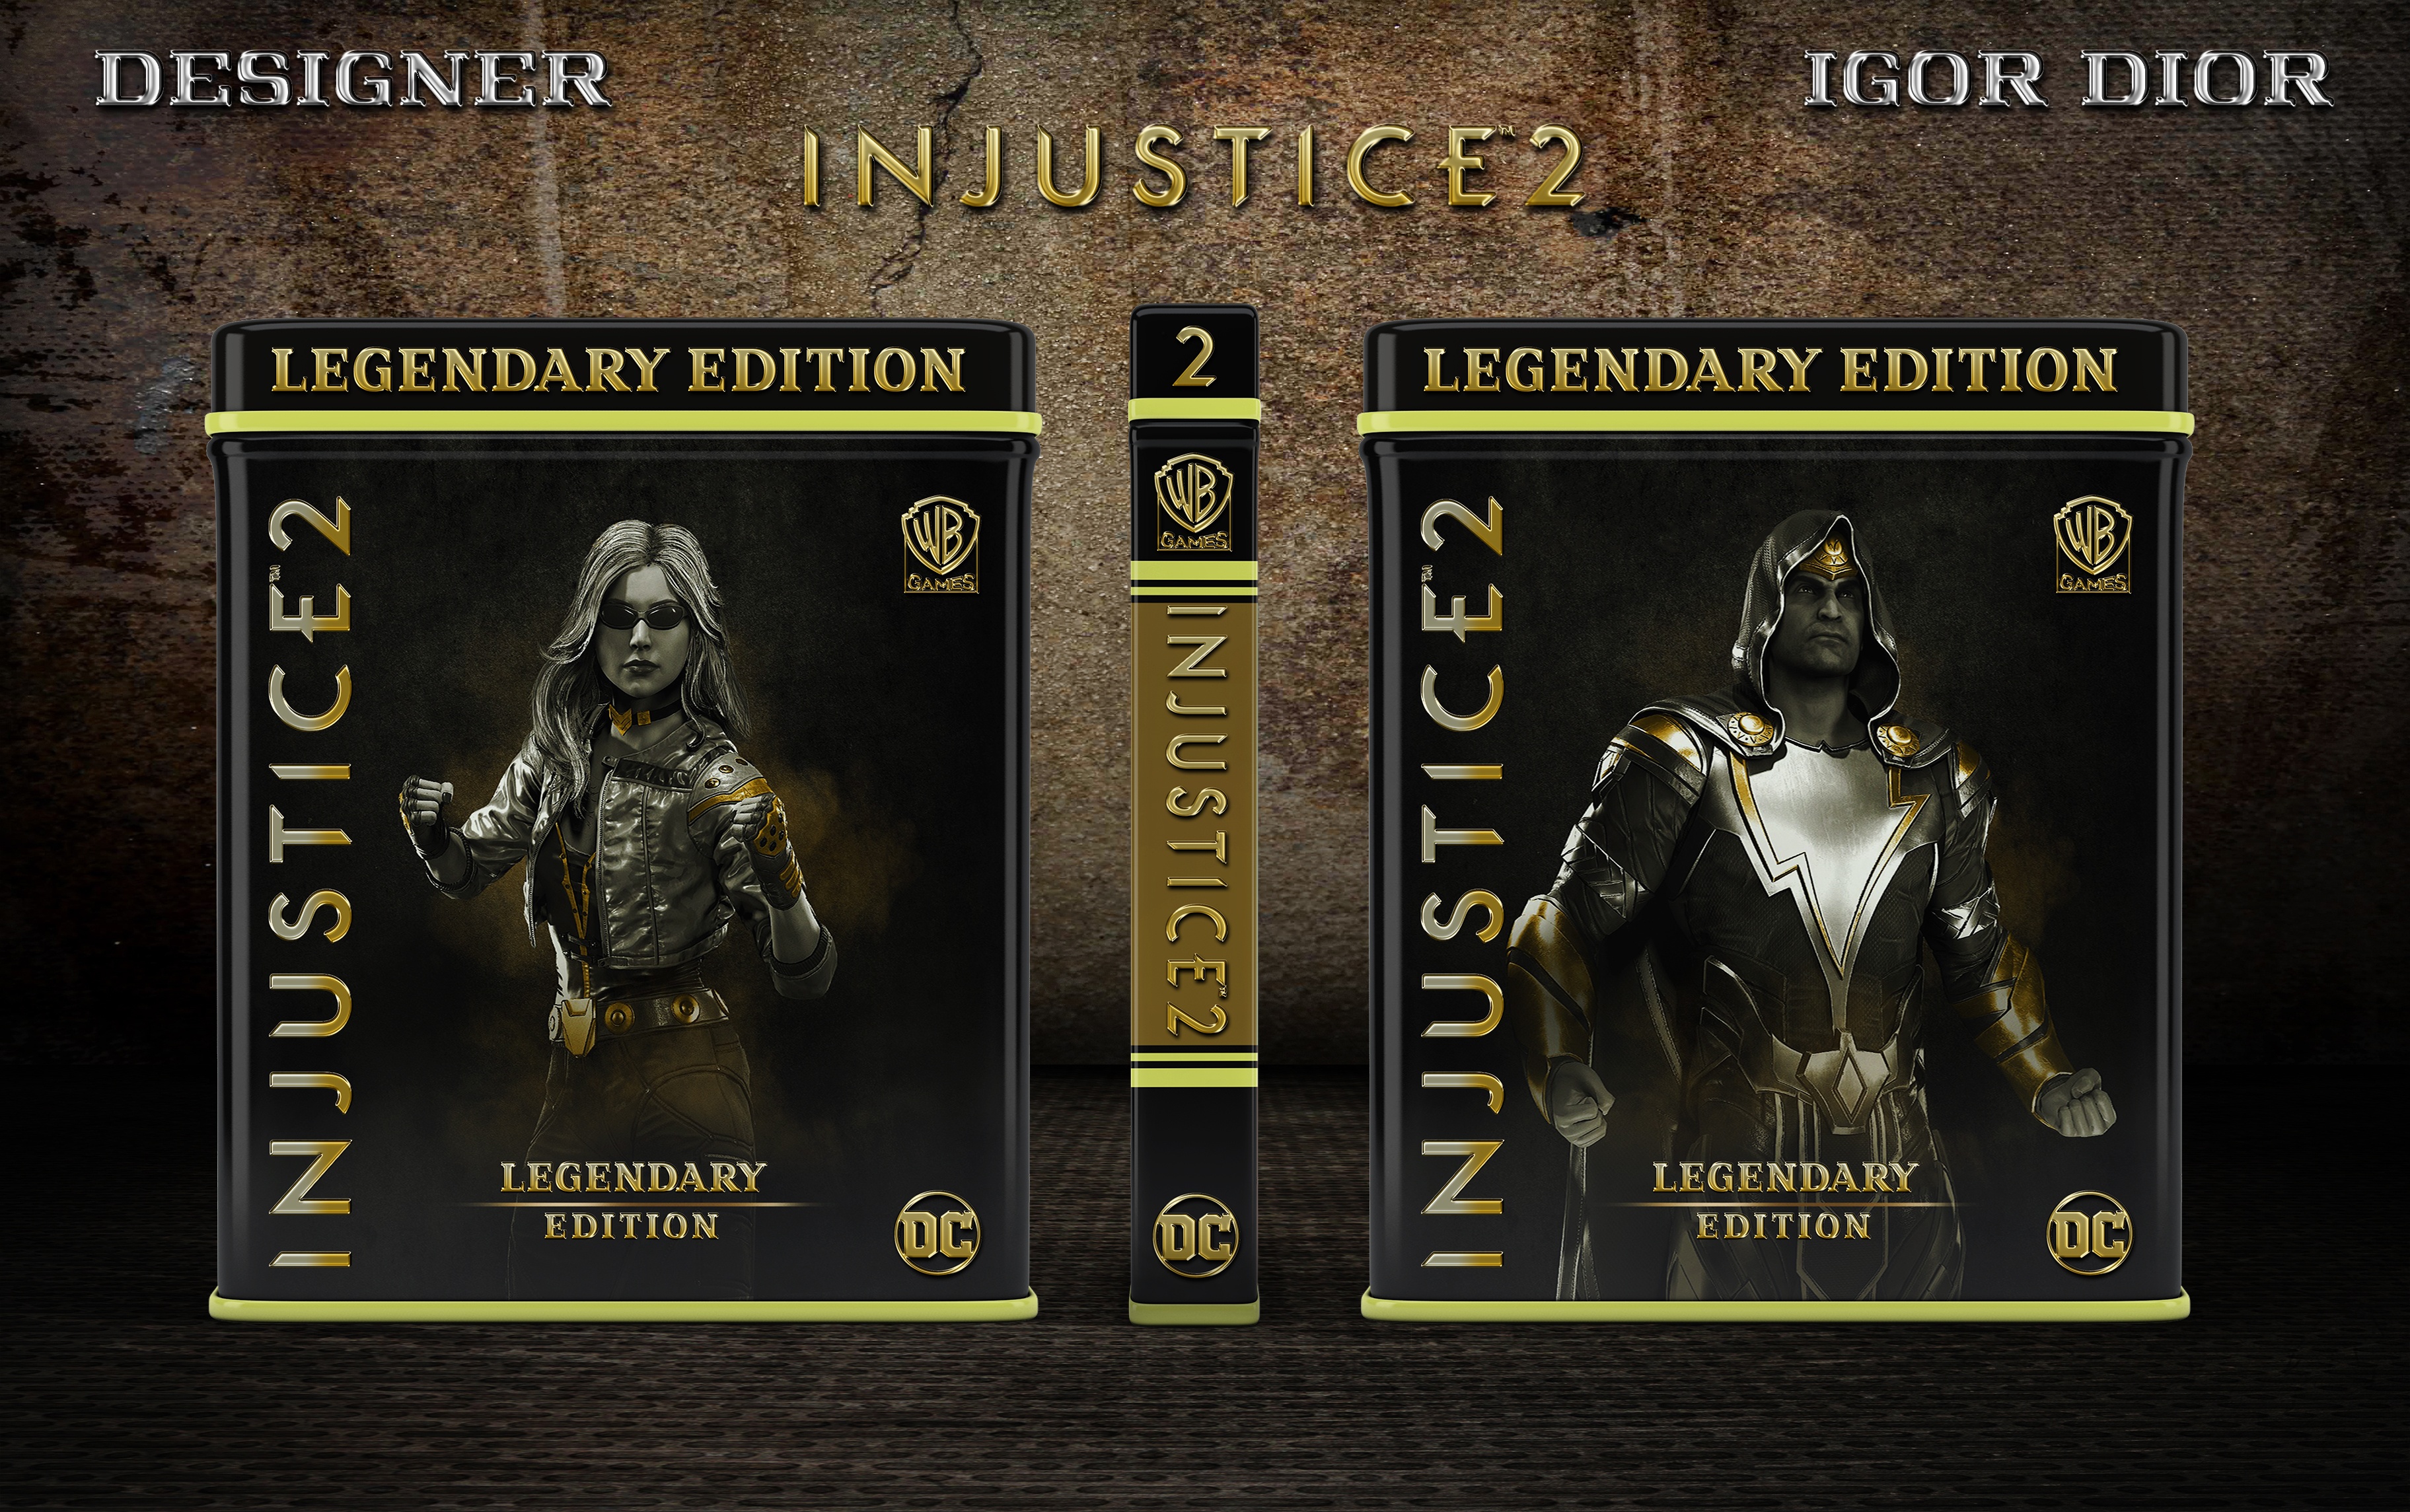 Injustice 2: Legendary Edition box cover